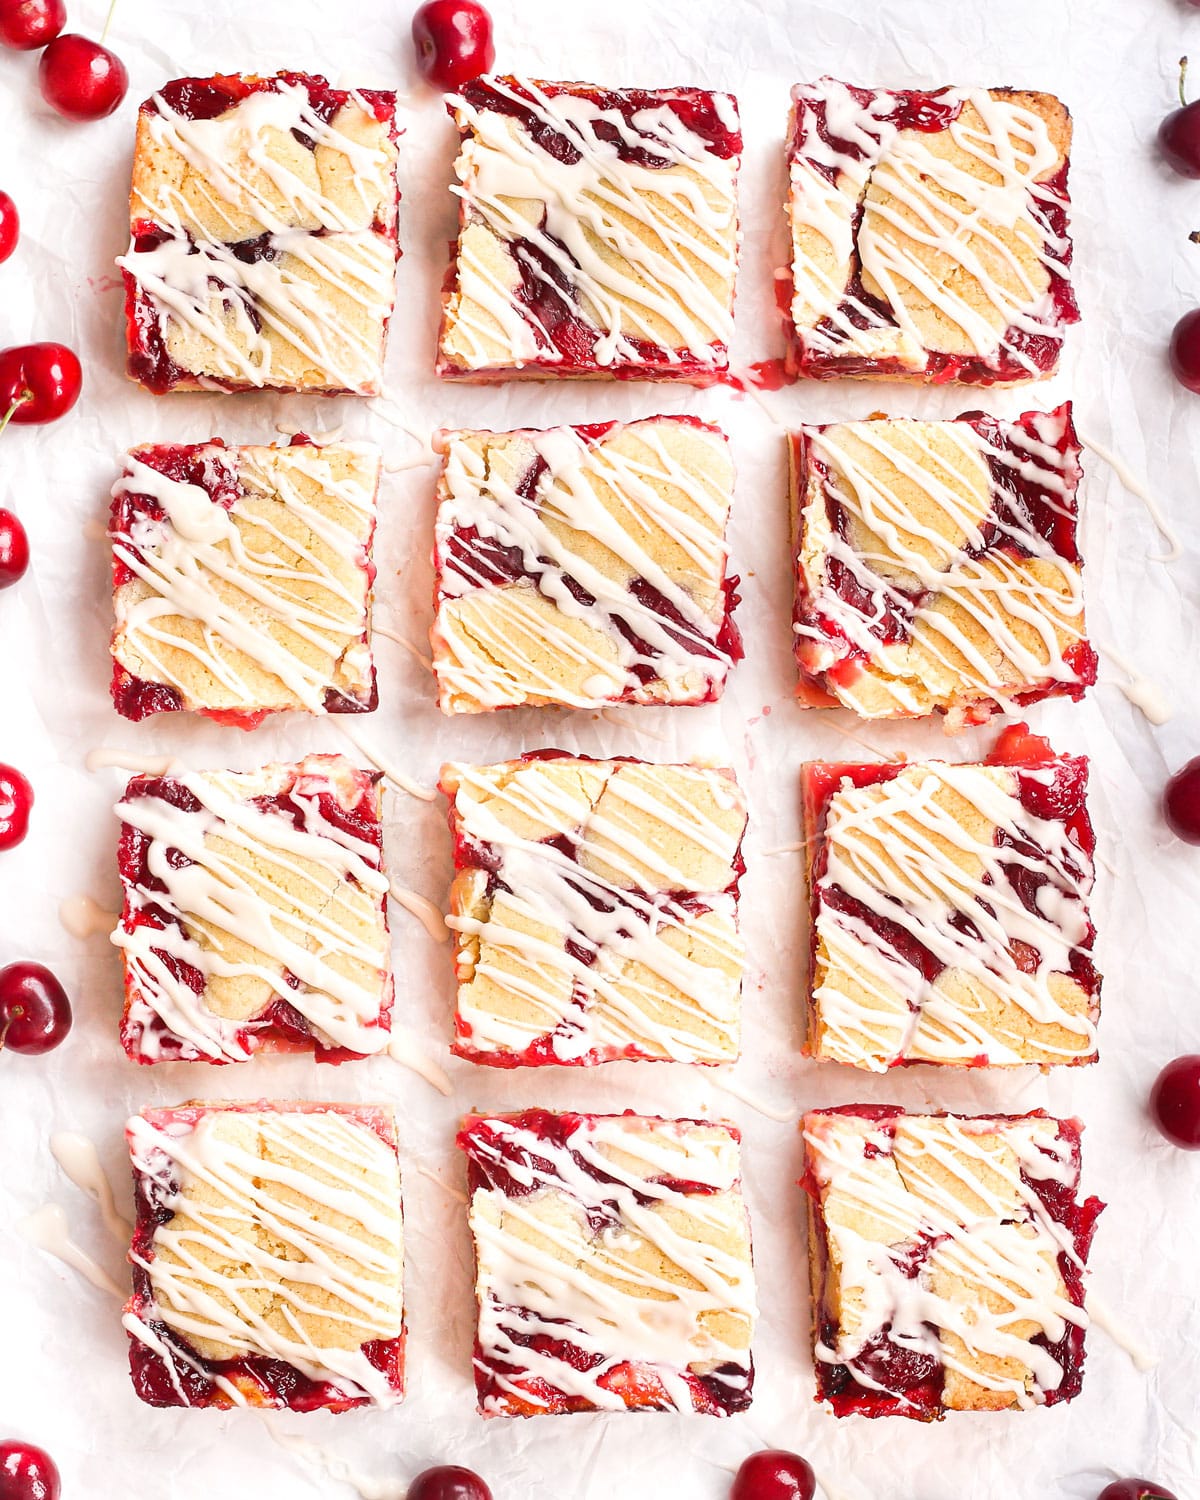 homemade cherry pie bars drizzled with glaze